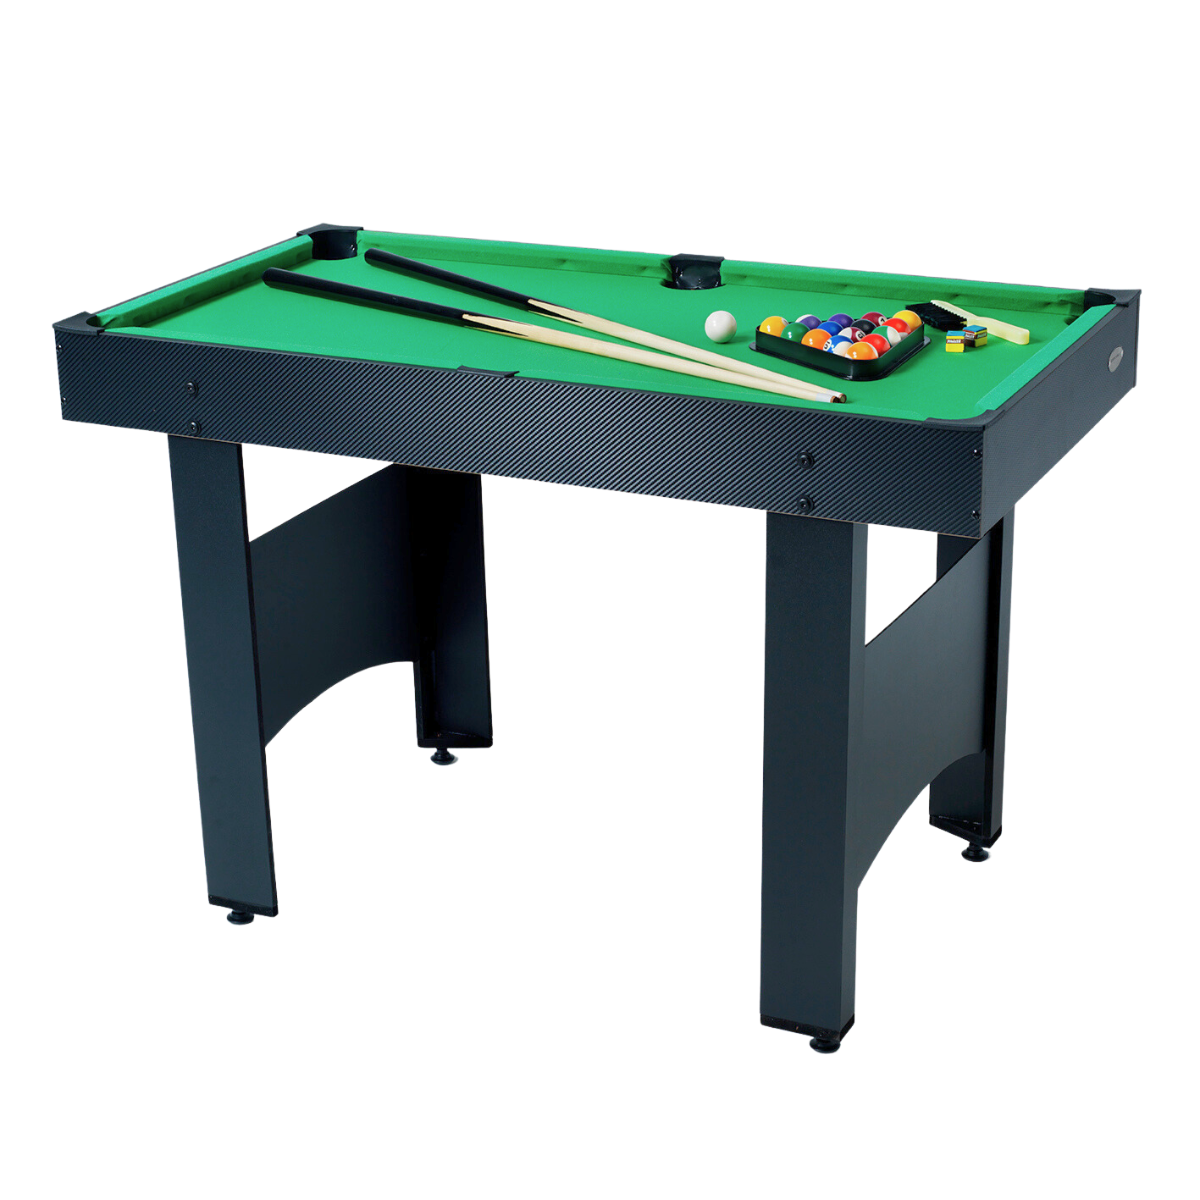 The UCLA 4ft Pool Table